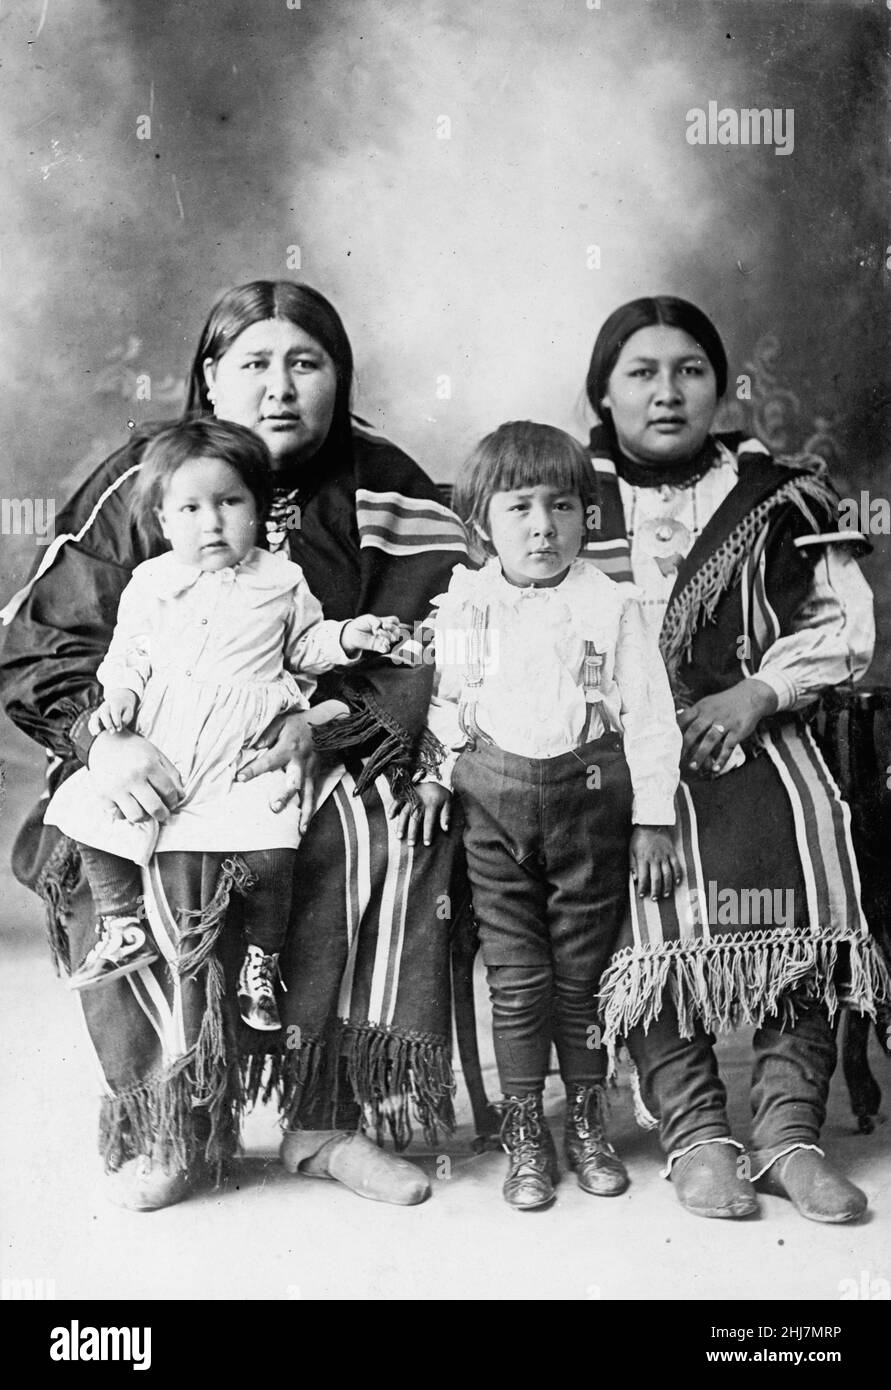 Antique and vintage photo - Native american / Indian / American Indians. Photo by Harris & Ewing 1916. Stock Photo